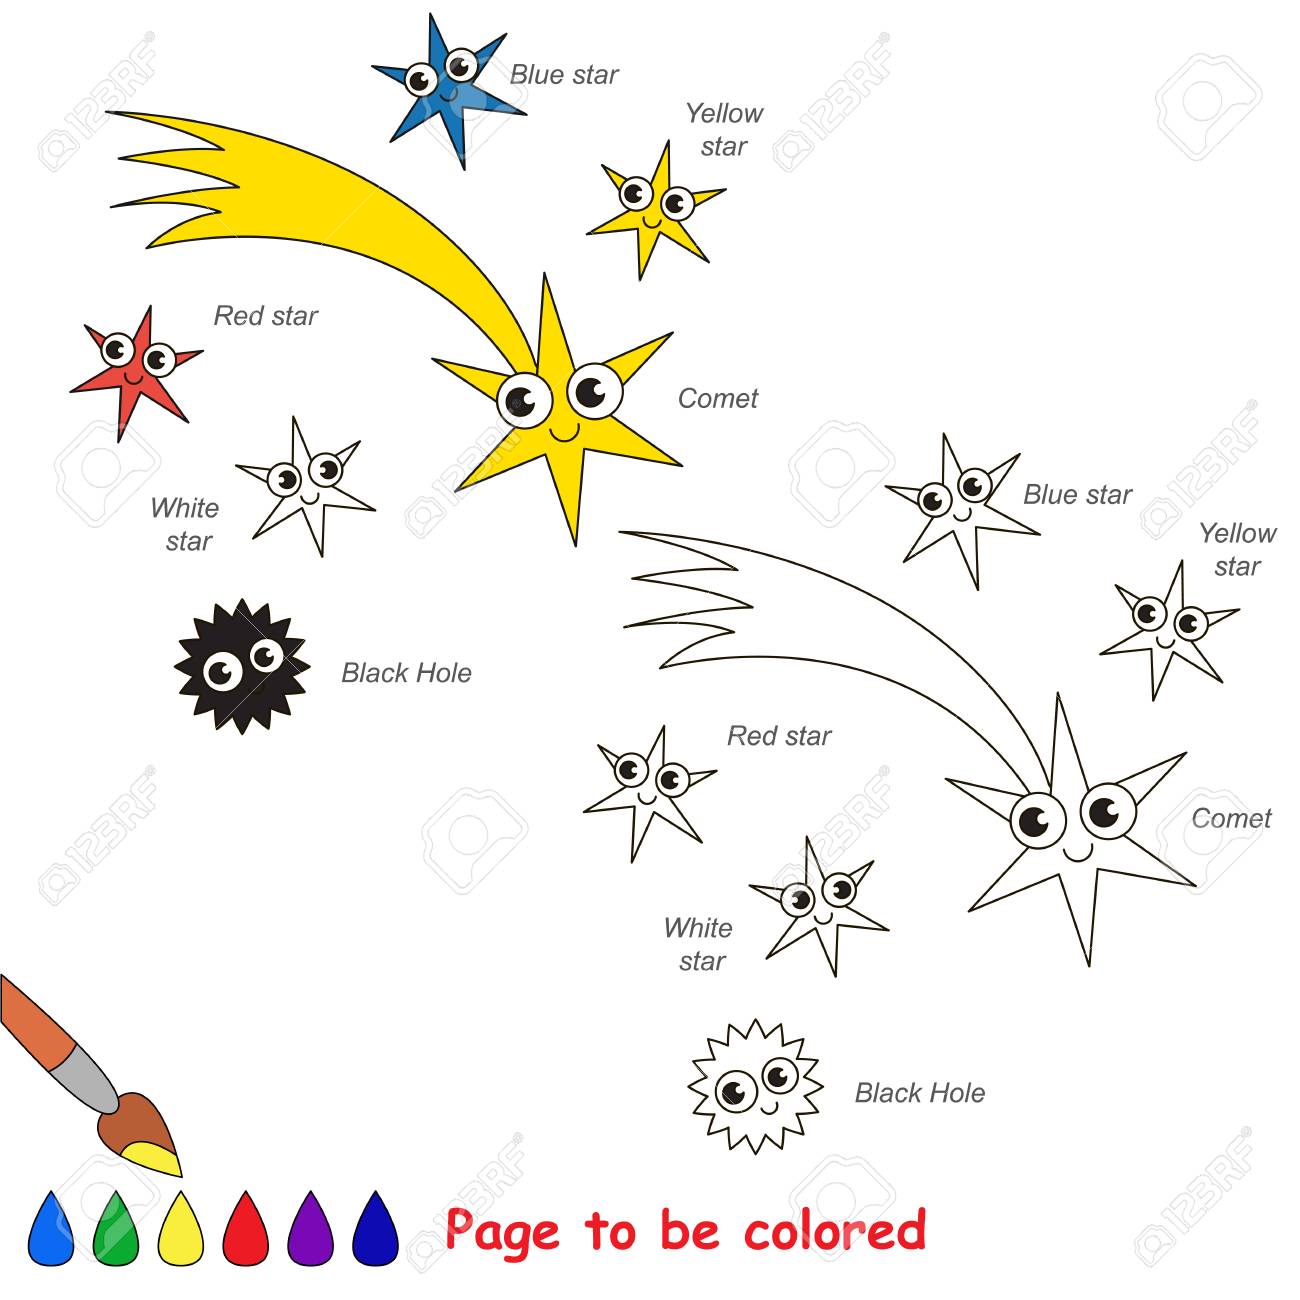 Flying et and red and white star and blue and yellow star black hole to be colored the coloring book for preschool kids with easy educational gaming level royalty free svg cliparts